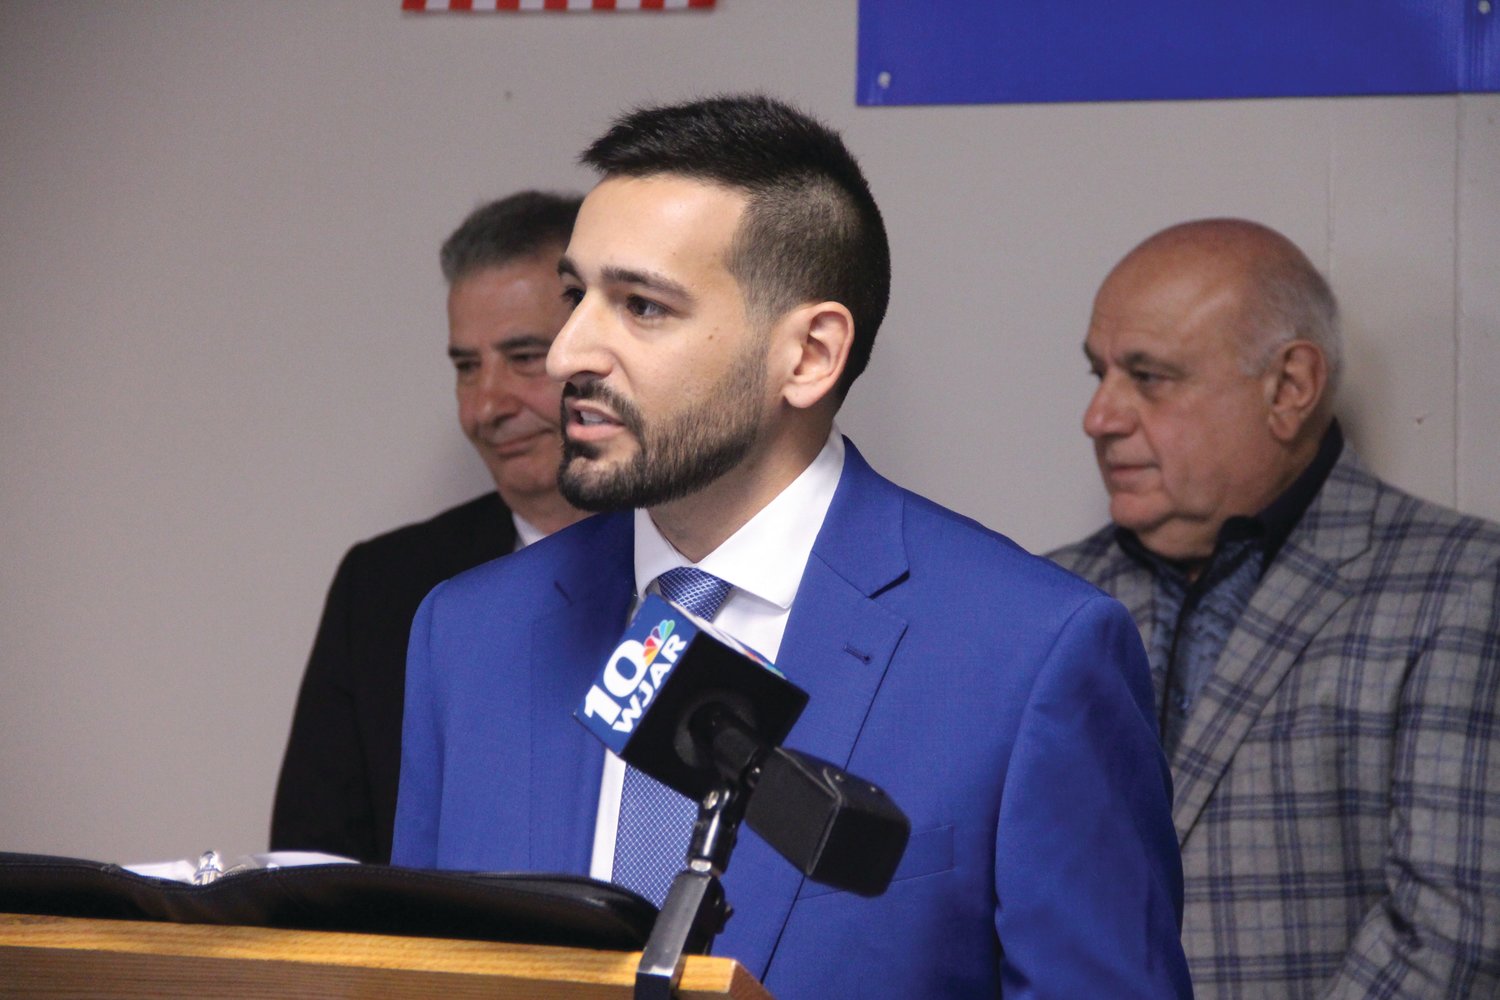 HAT IN THE RING: Joe Polisena Jr. announced his candidacy for Johnston mayor at a campaign kick-off event Monday night.